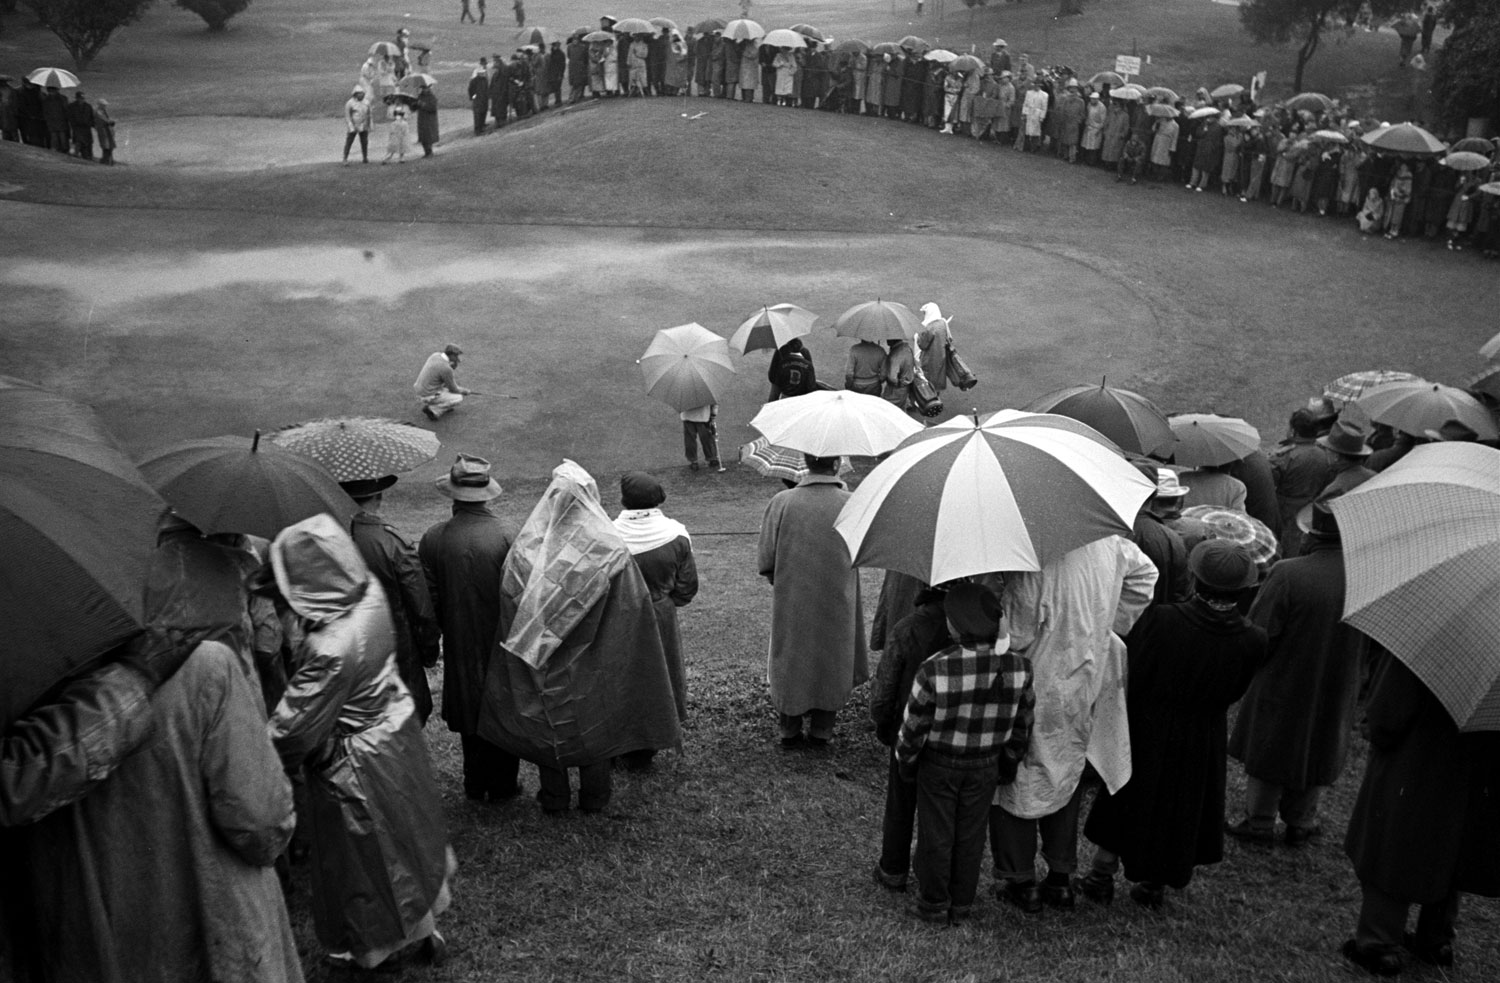 Los Angeles Open, Riviera Country Club, January 1950.